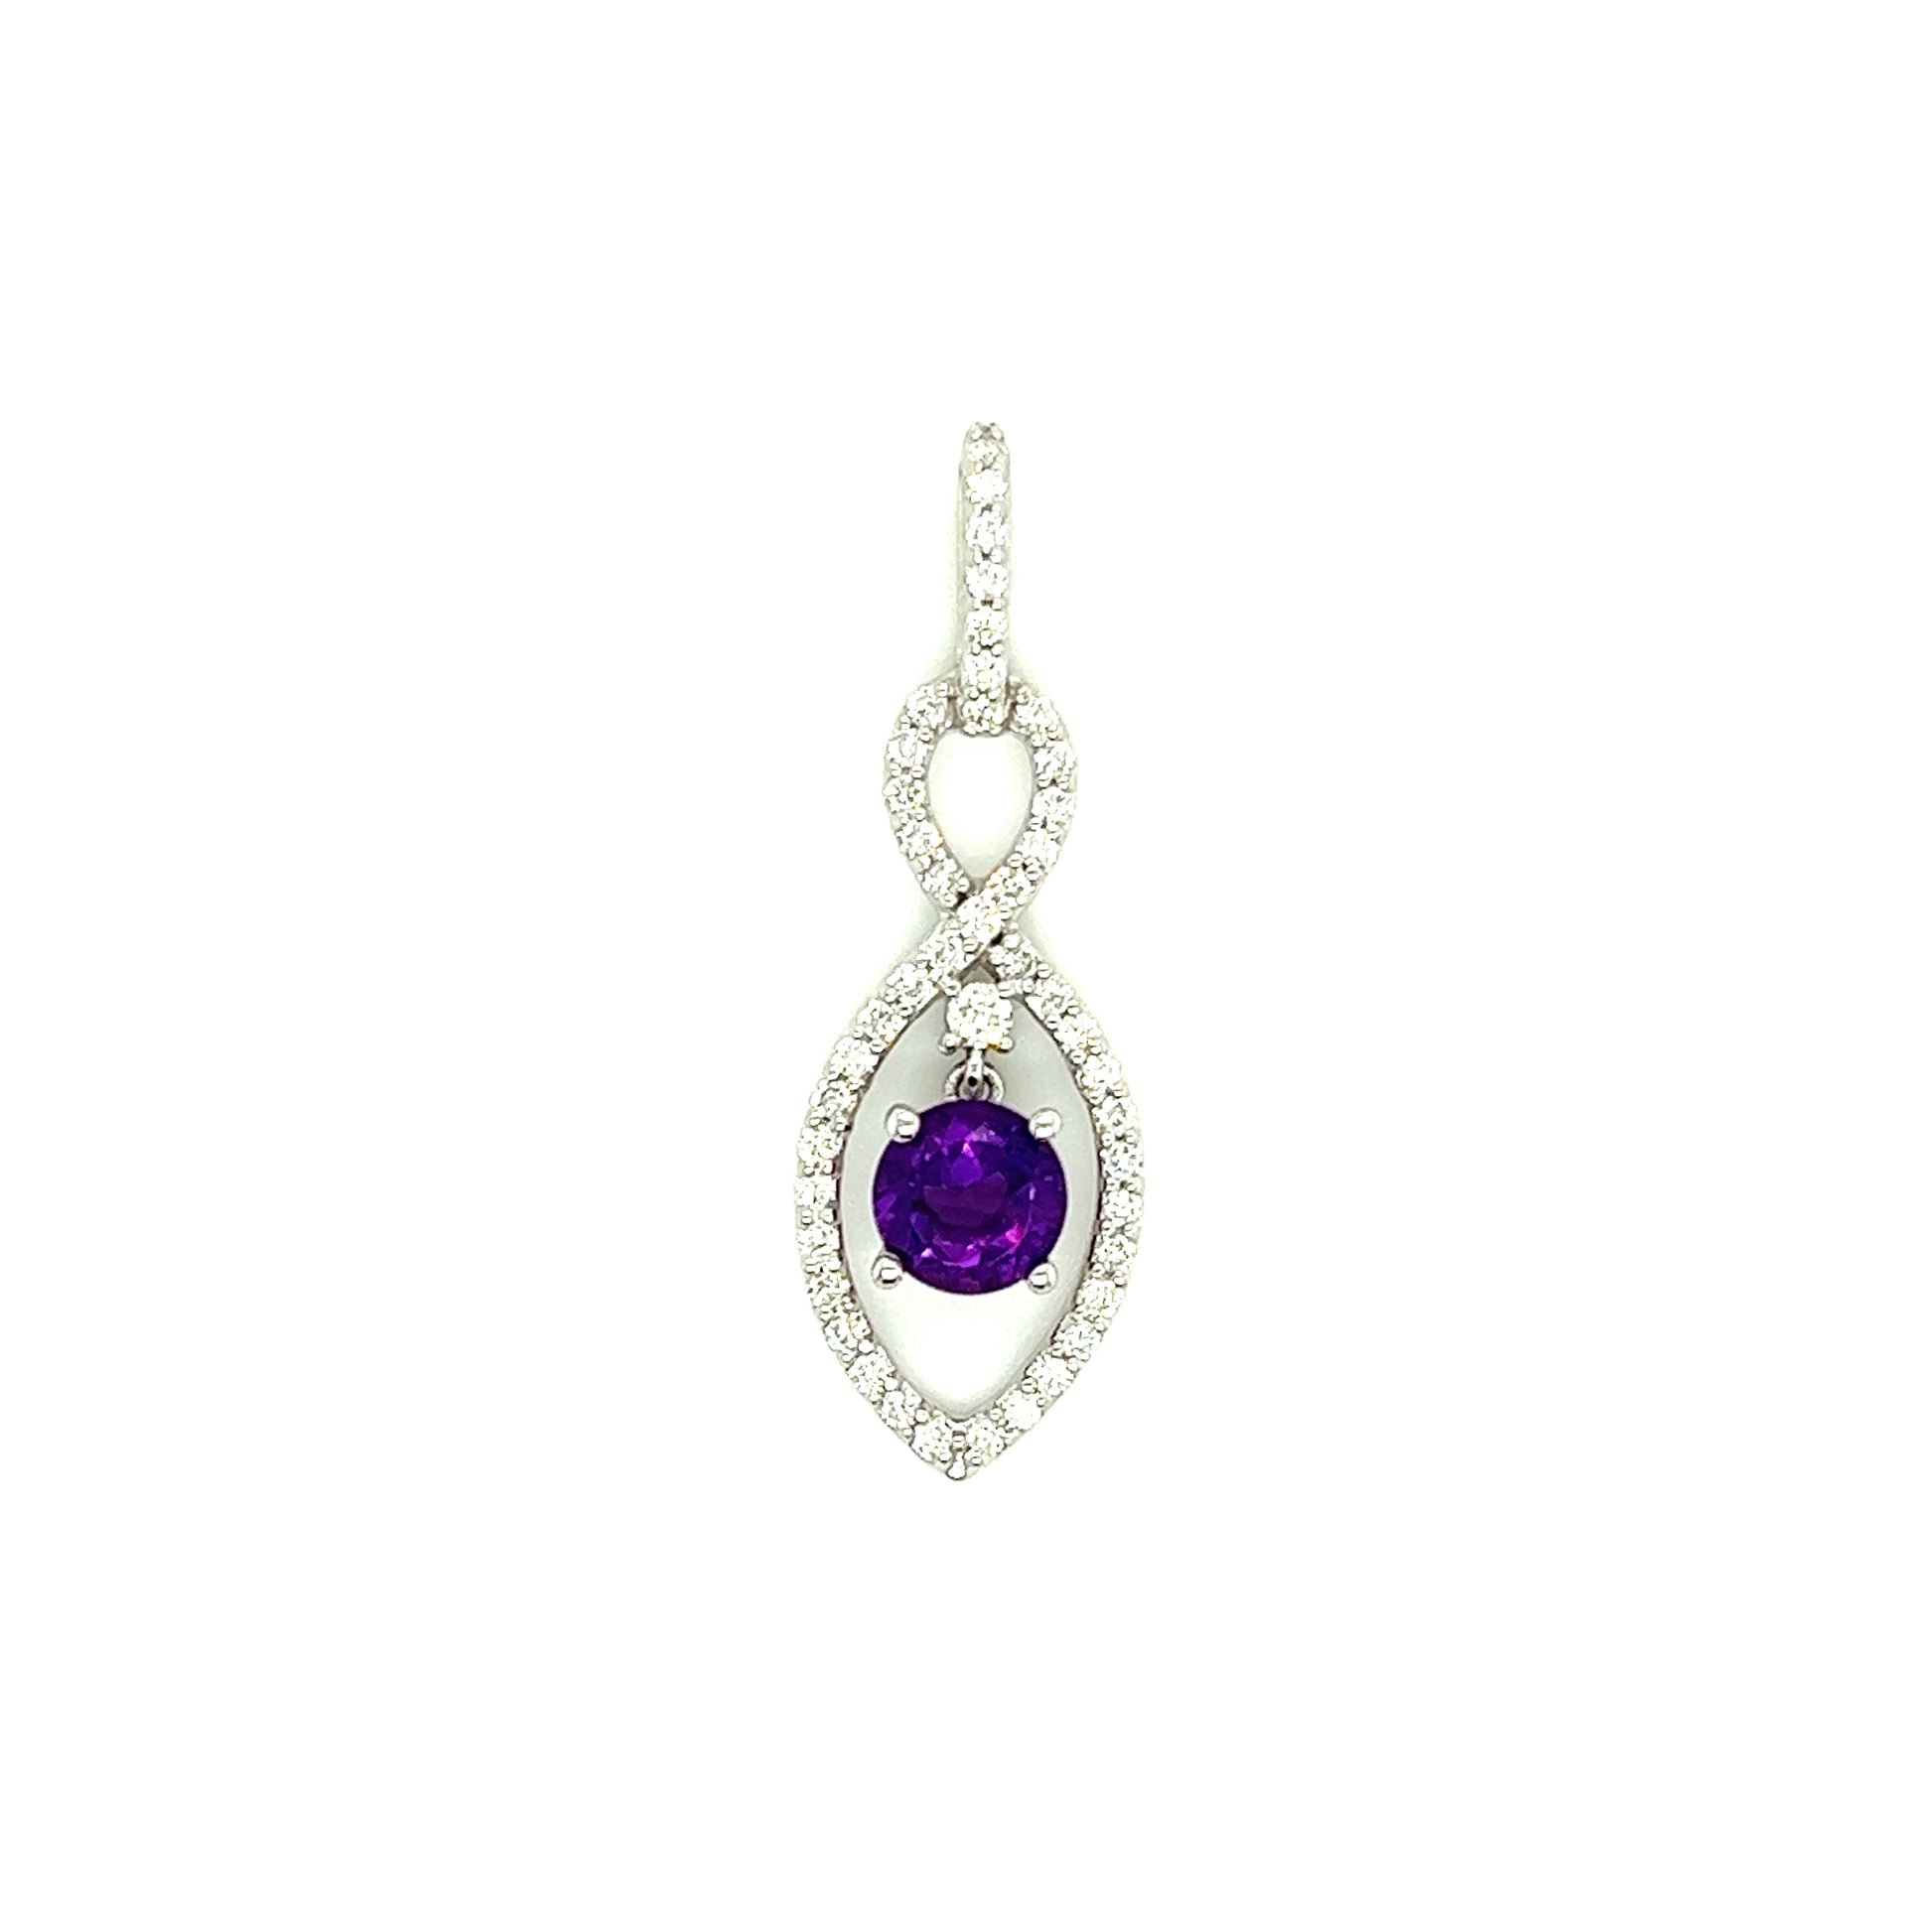 Amethyst Infinity Pendant with Forty-Six Diamonds in 14K White Gold Pendant Front View